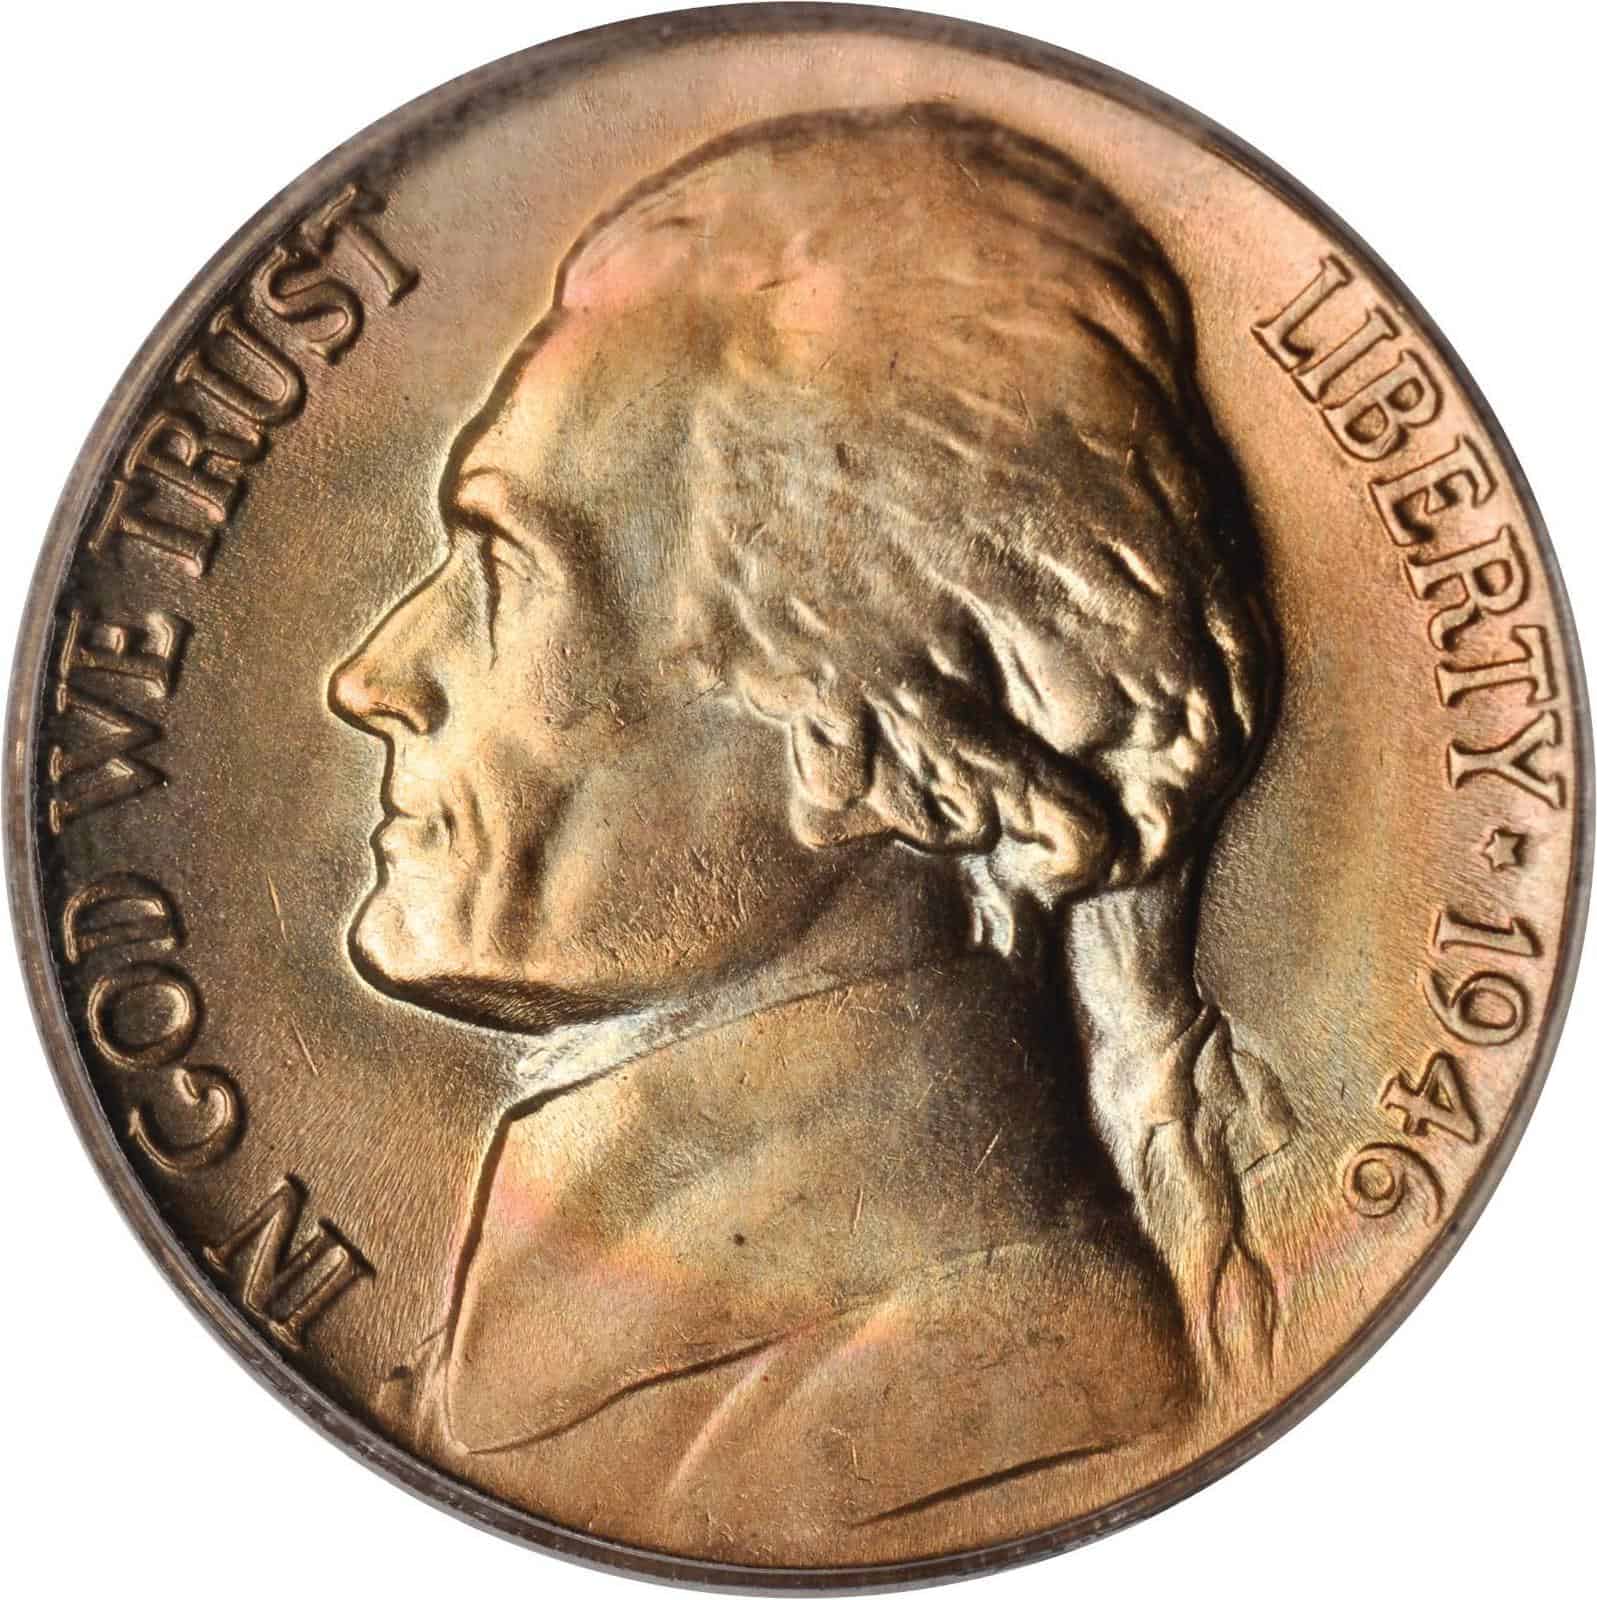 The obverse of the 1946 Jefferson nickel